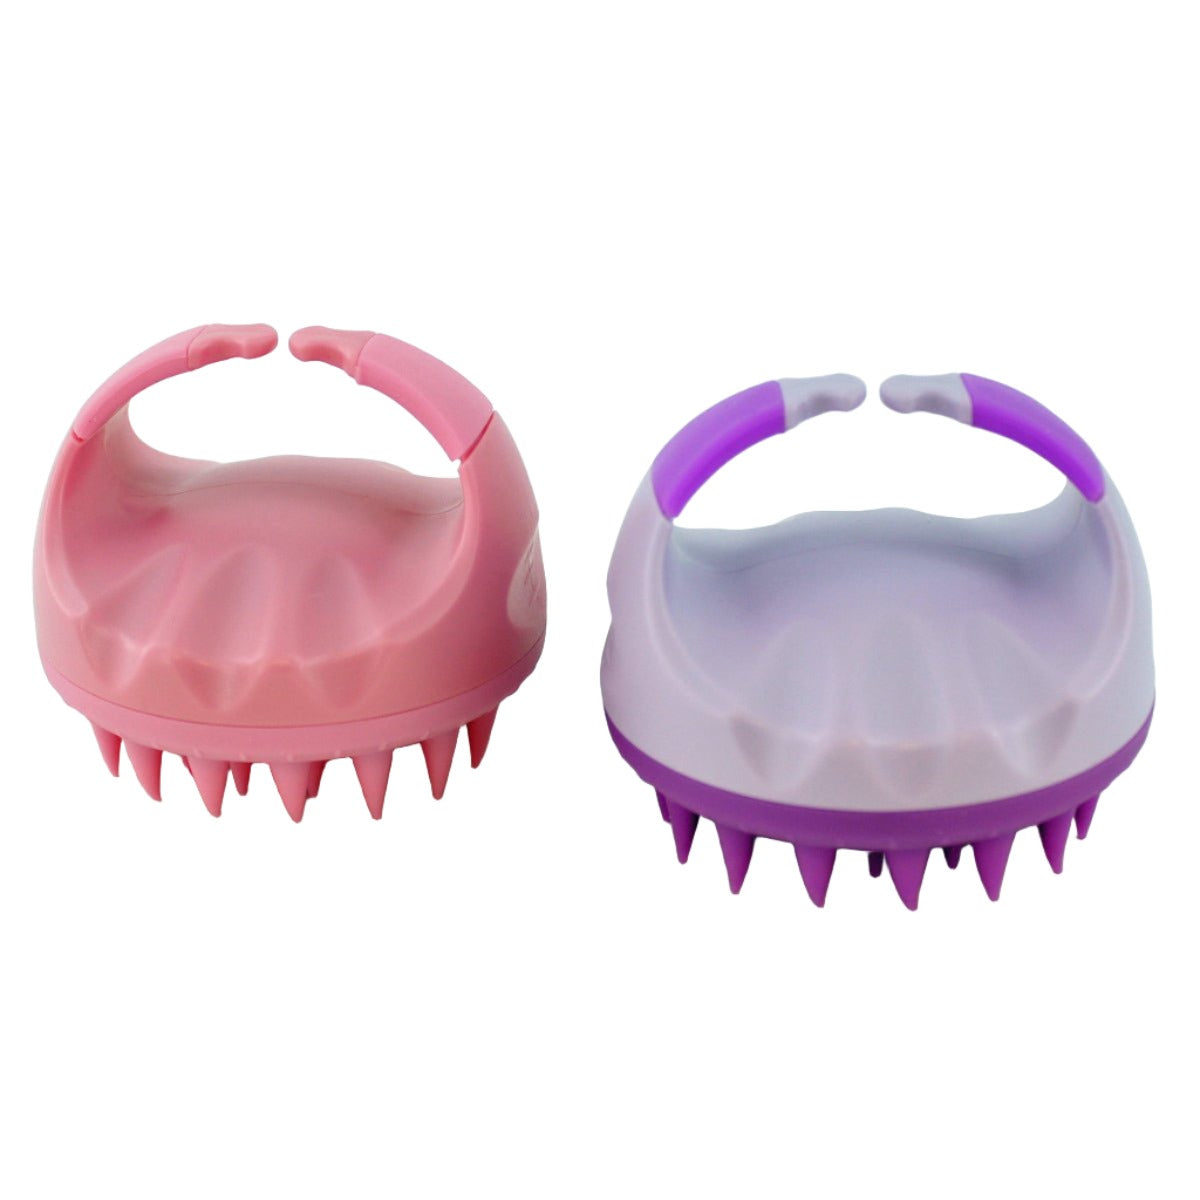 Scalp Massager Shampoo Brush, Scalp Scrubber Soft Silicone Dandruff Removal, Scalp Massager for Hair Growth, Wet Dry Hair Brush for Scalp Care